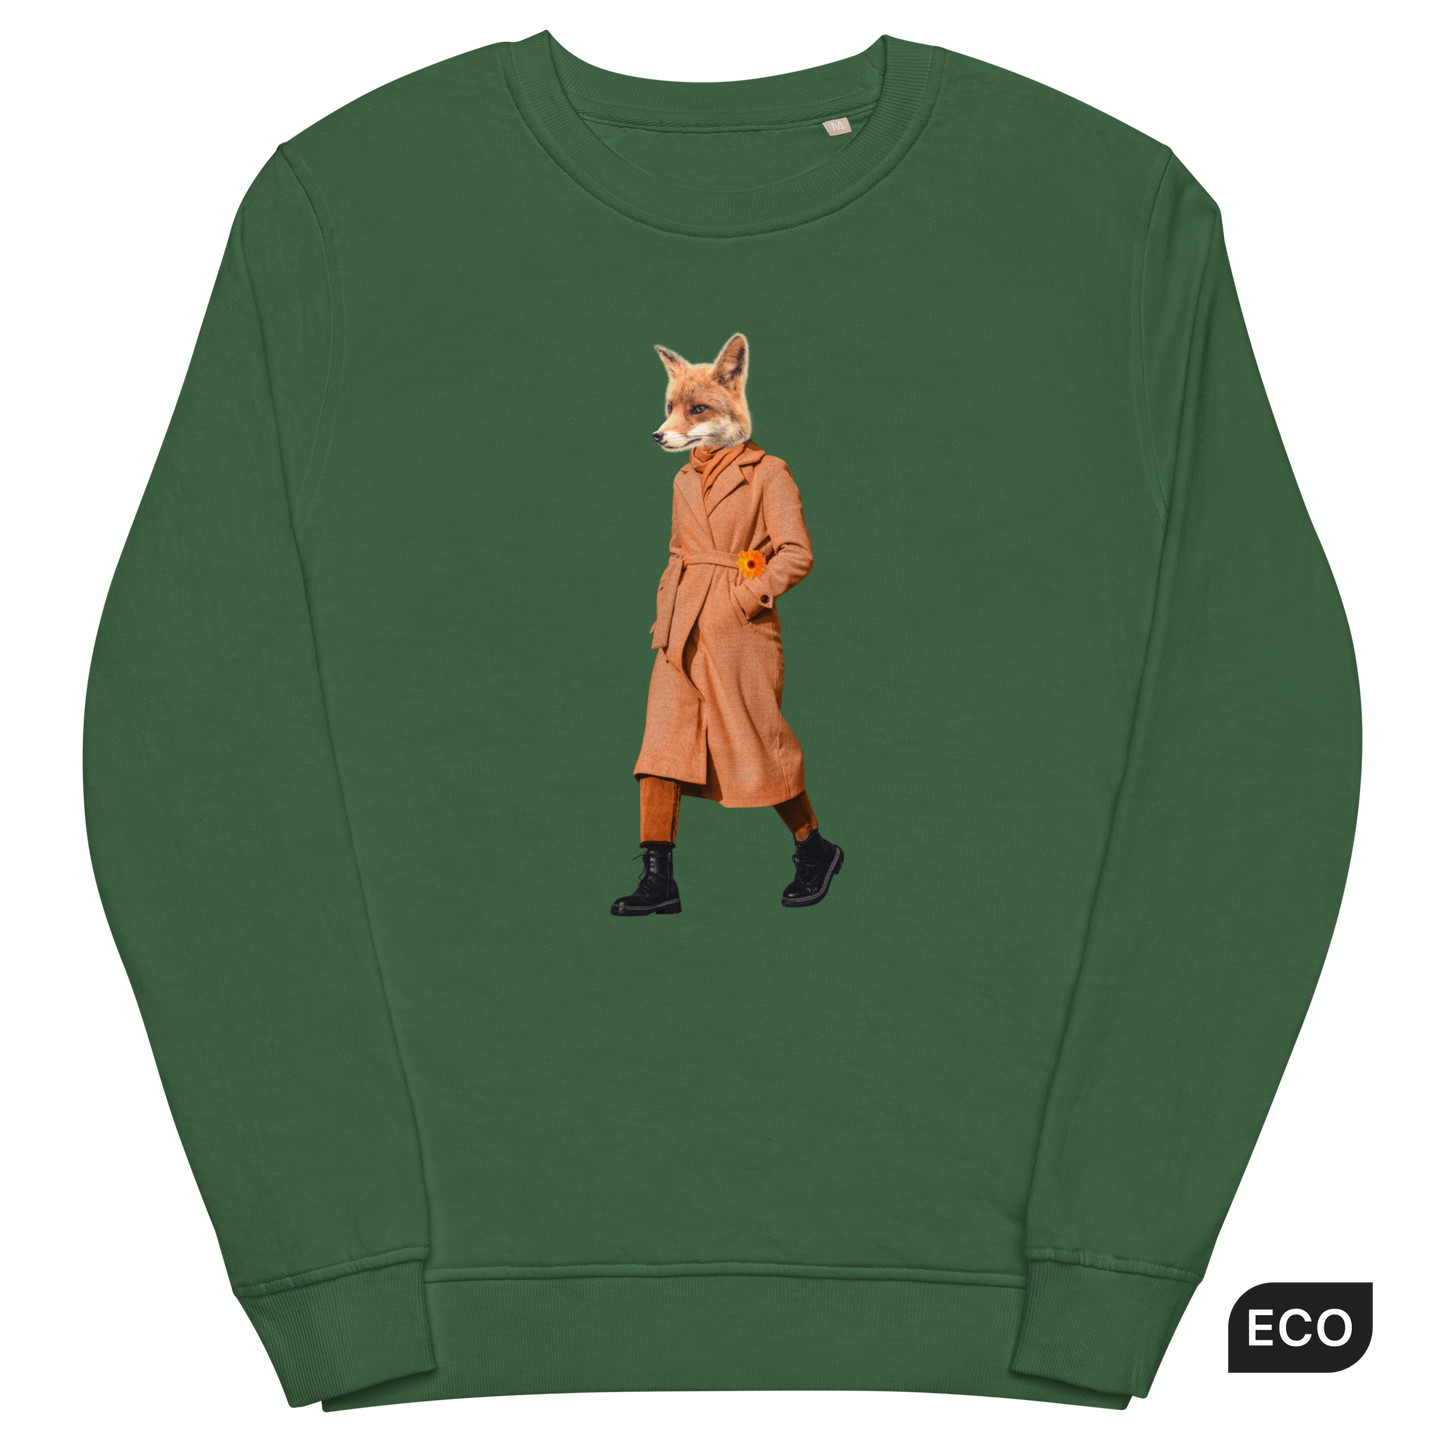 Bottle Green Organic Cotton Anthropomorphic Fox Sweatshirt showcasing a sly Anthropomorphic Fox In a Trench Coat graphic on the chest - Cool Anthropomorphic Fox Graphic Sweatshirts - Boozy Fox